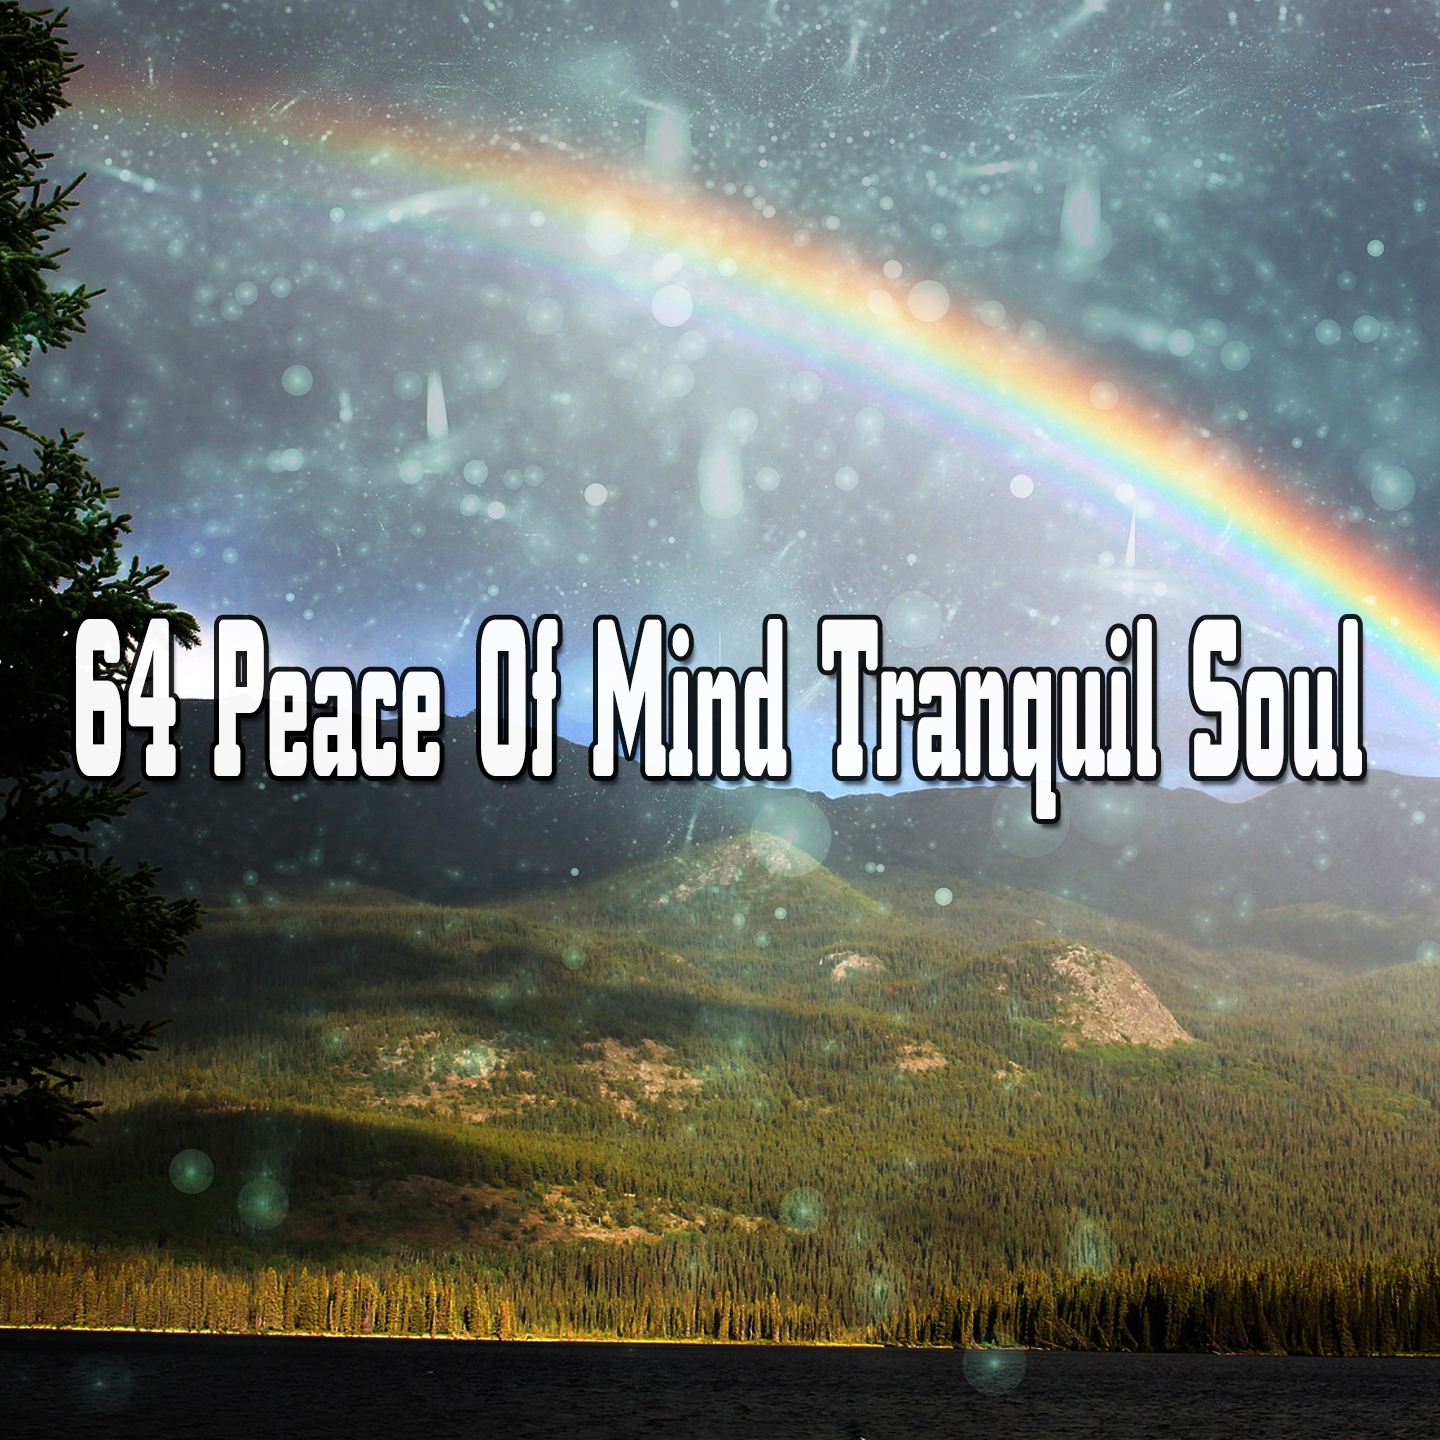 64 Peace Of Mind Tranquil Soul